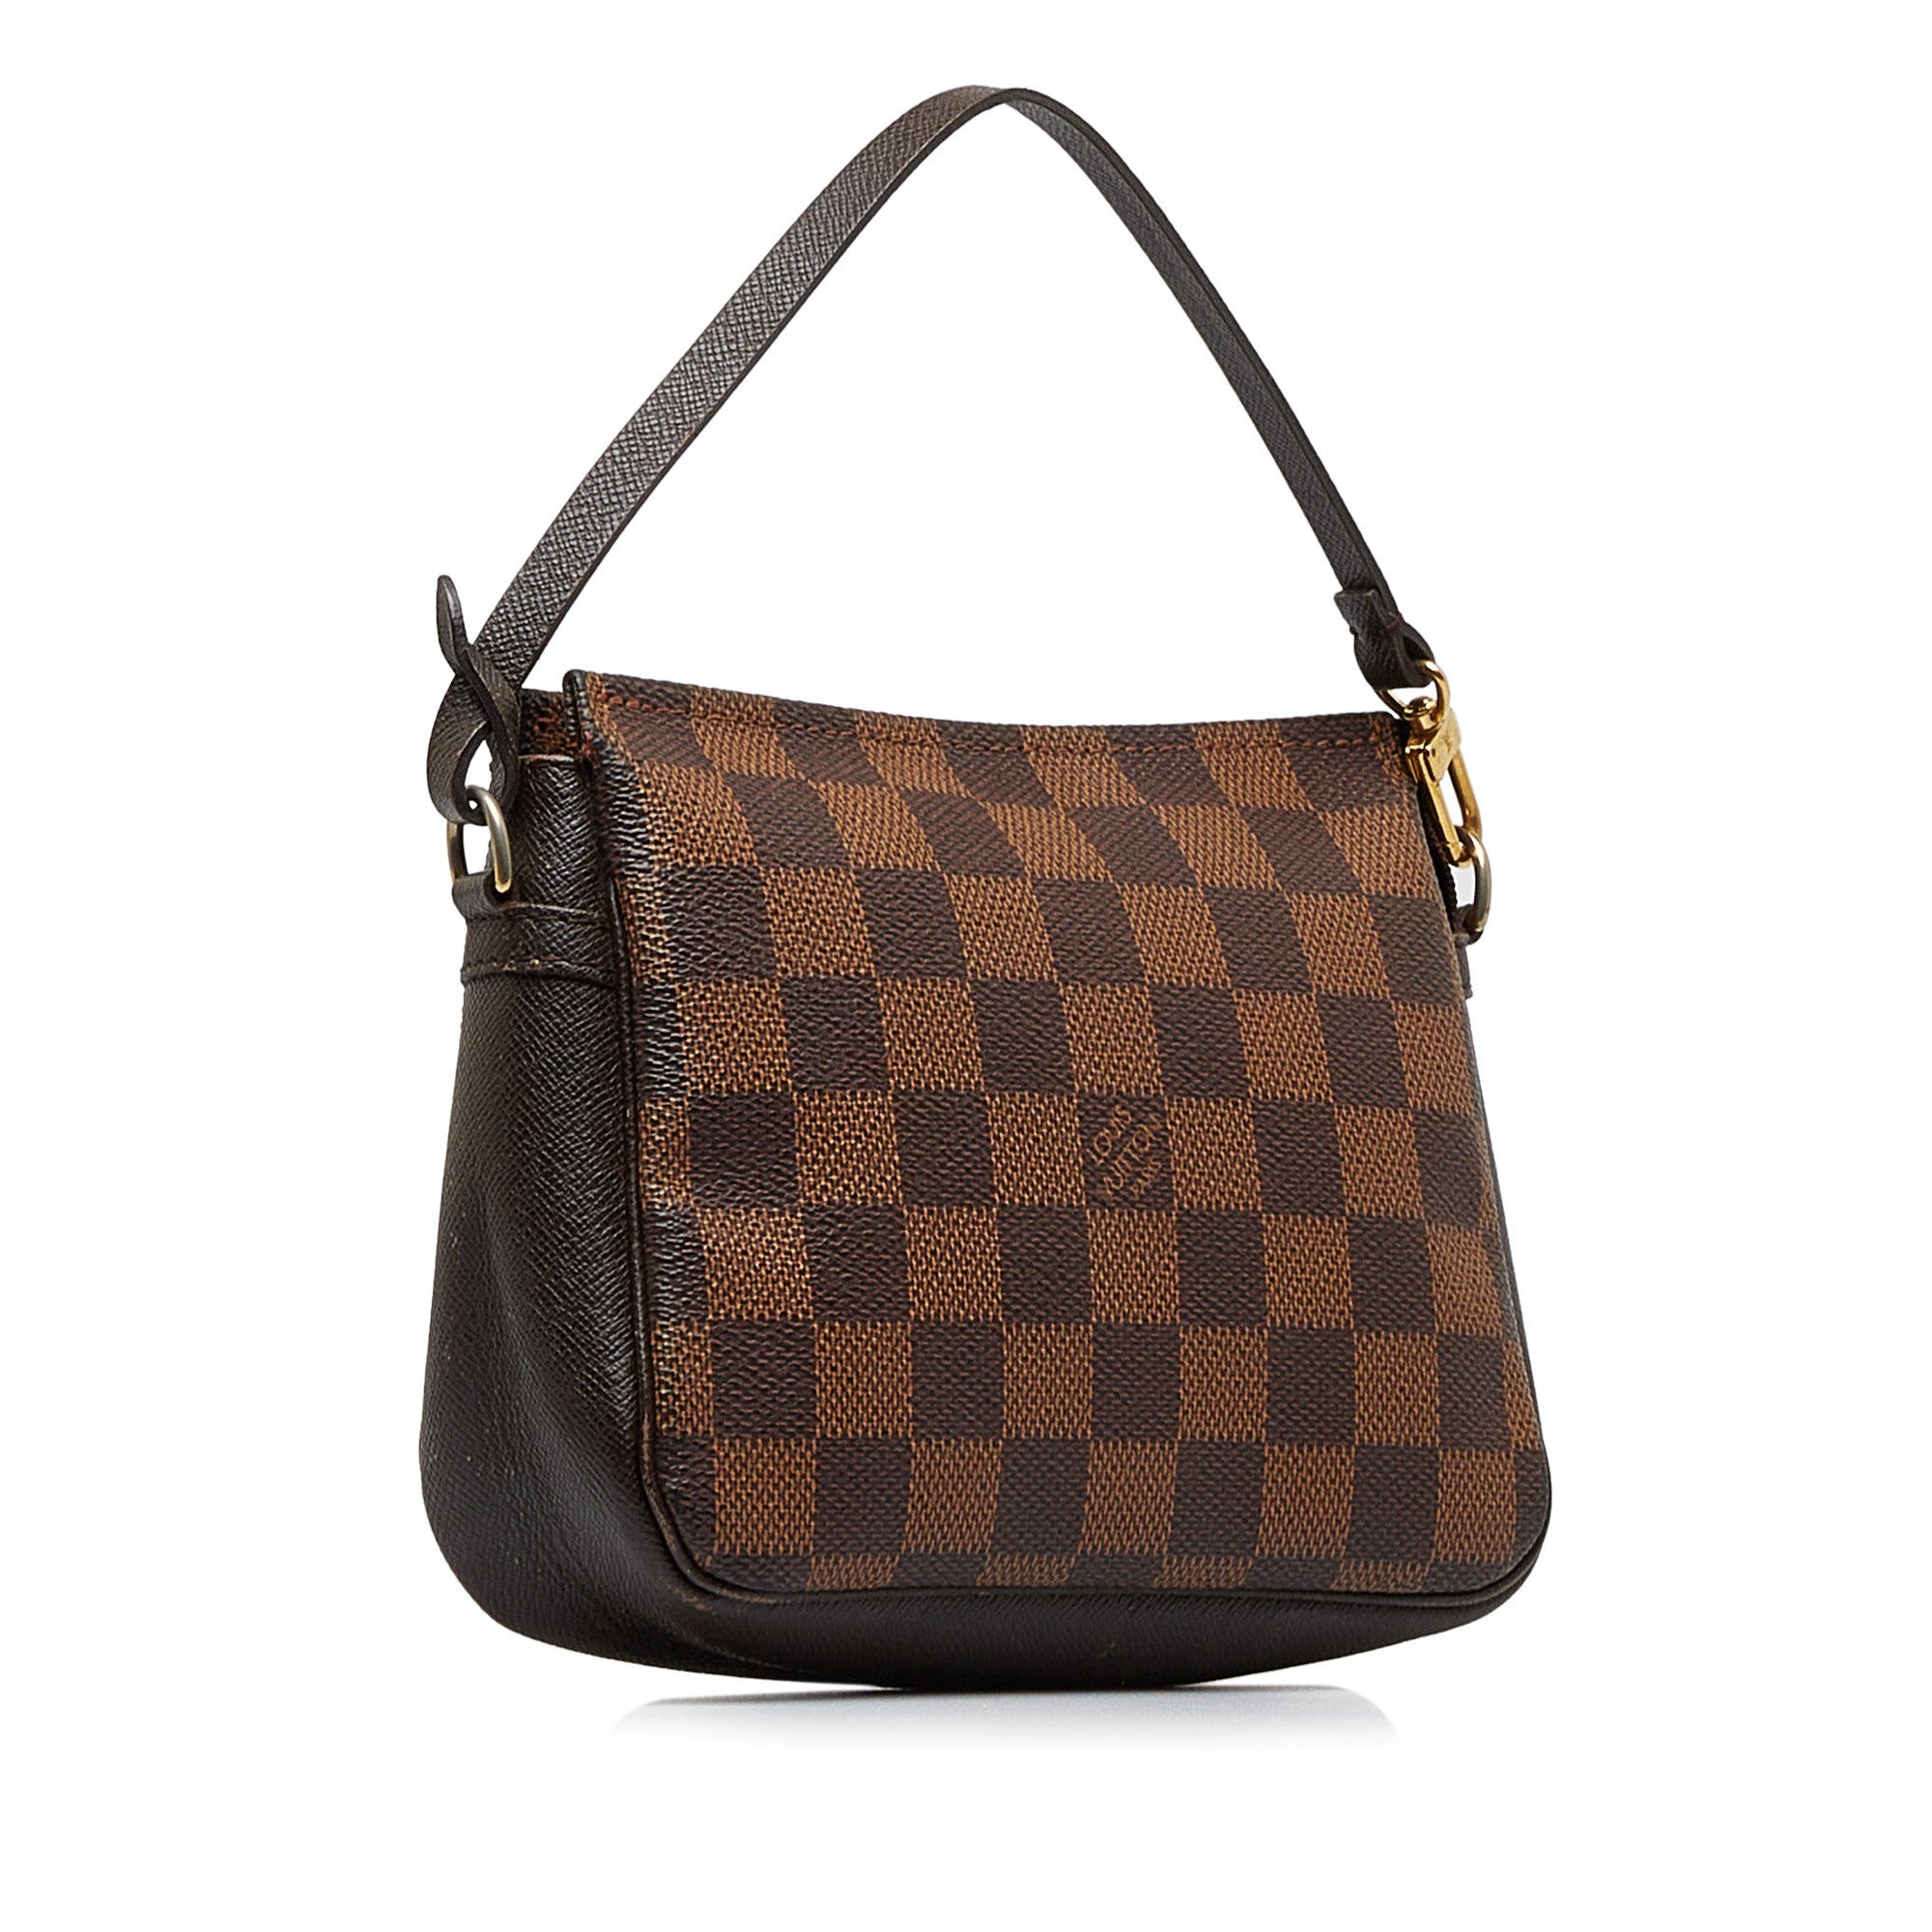 Are you a fan of Damier Azur? Pretty but I do fear it'll get dirty